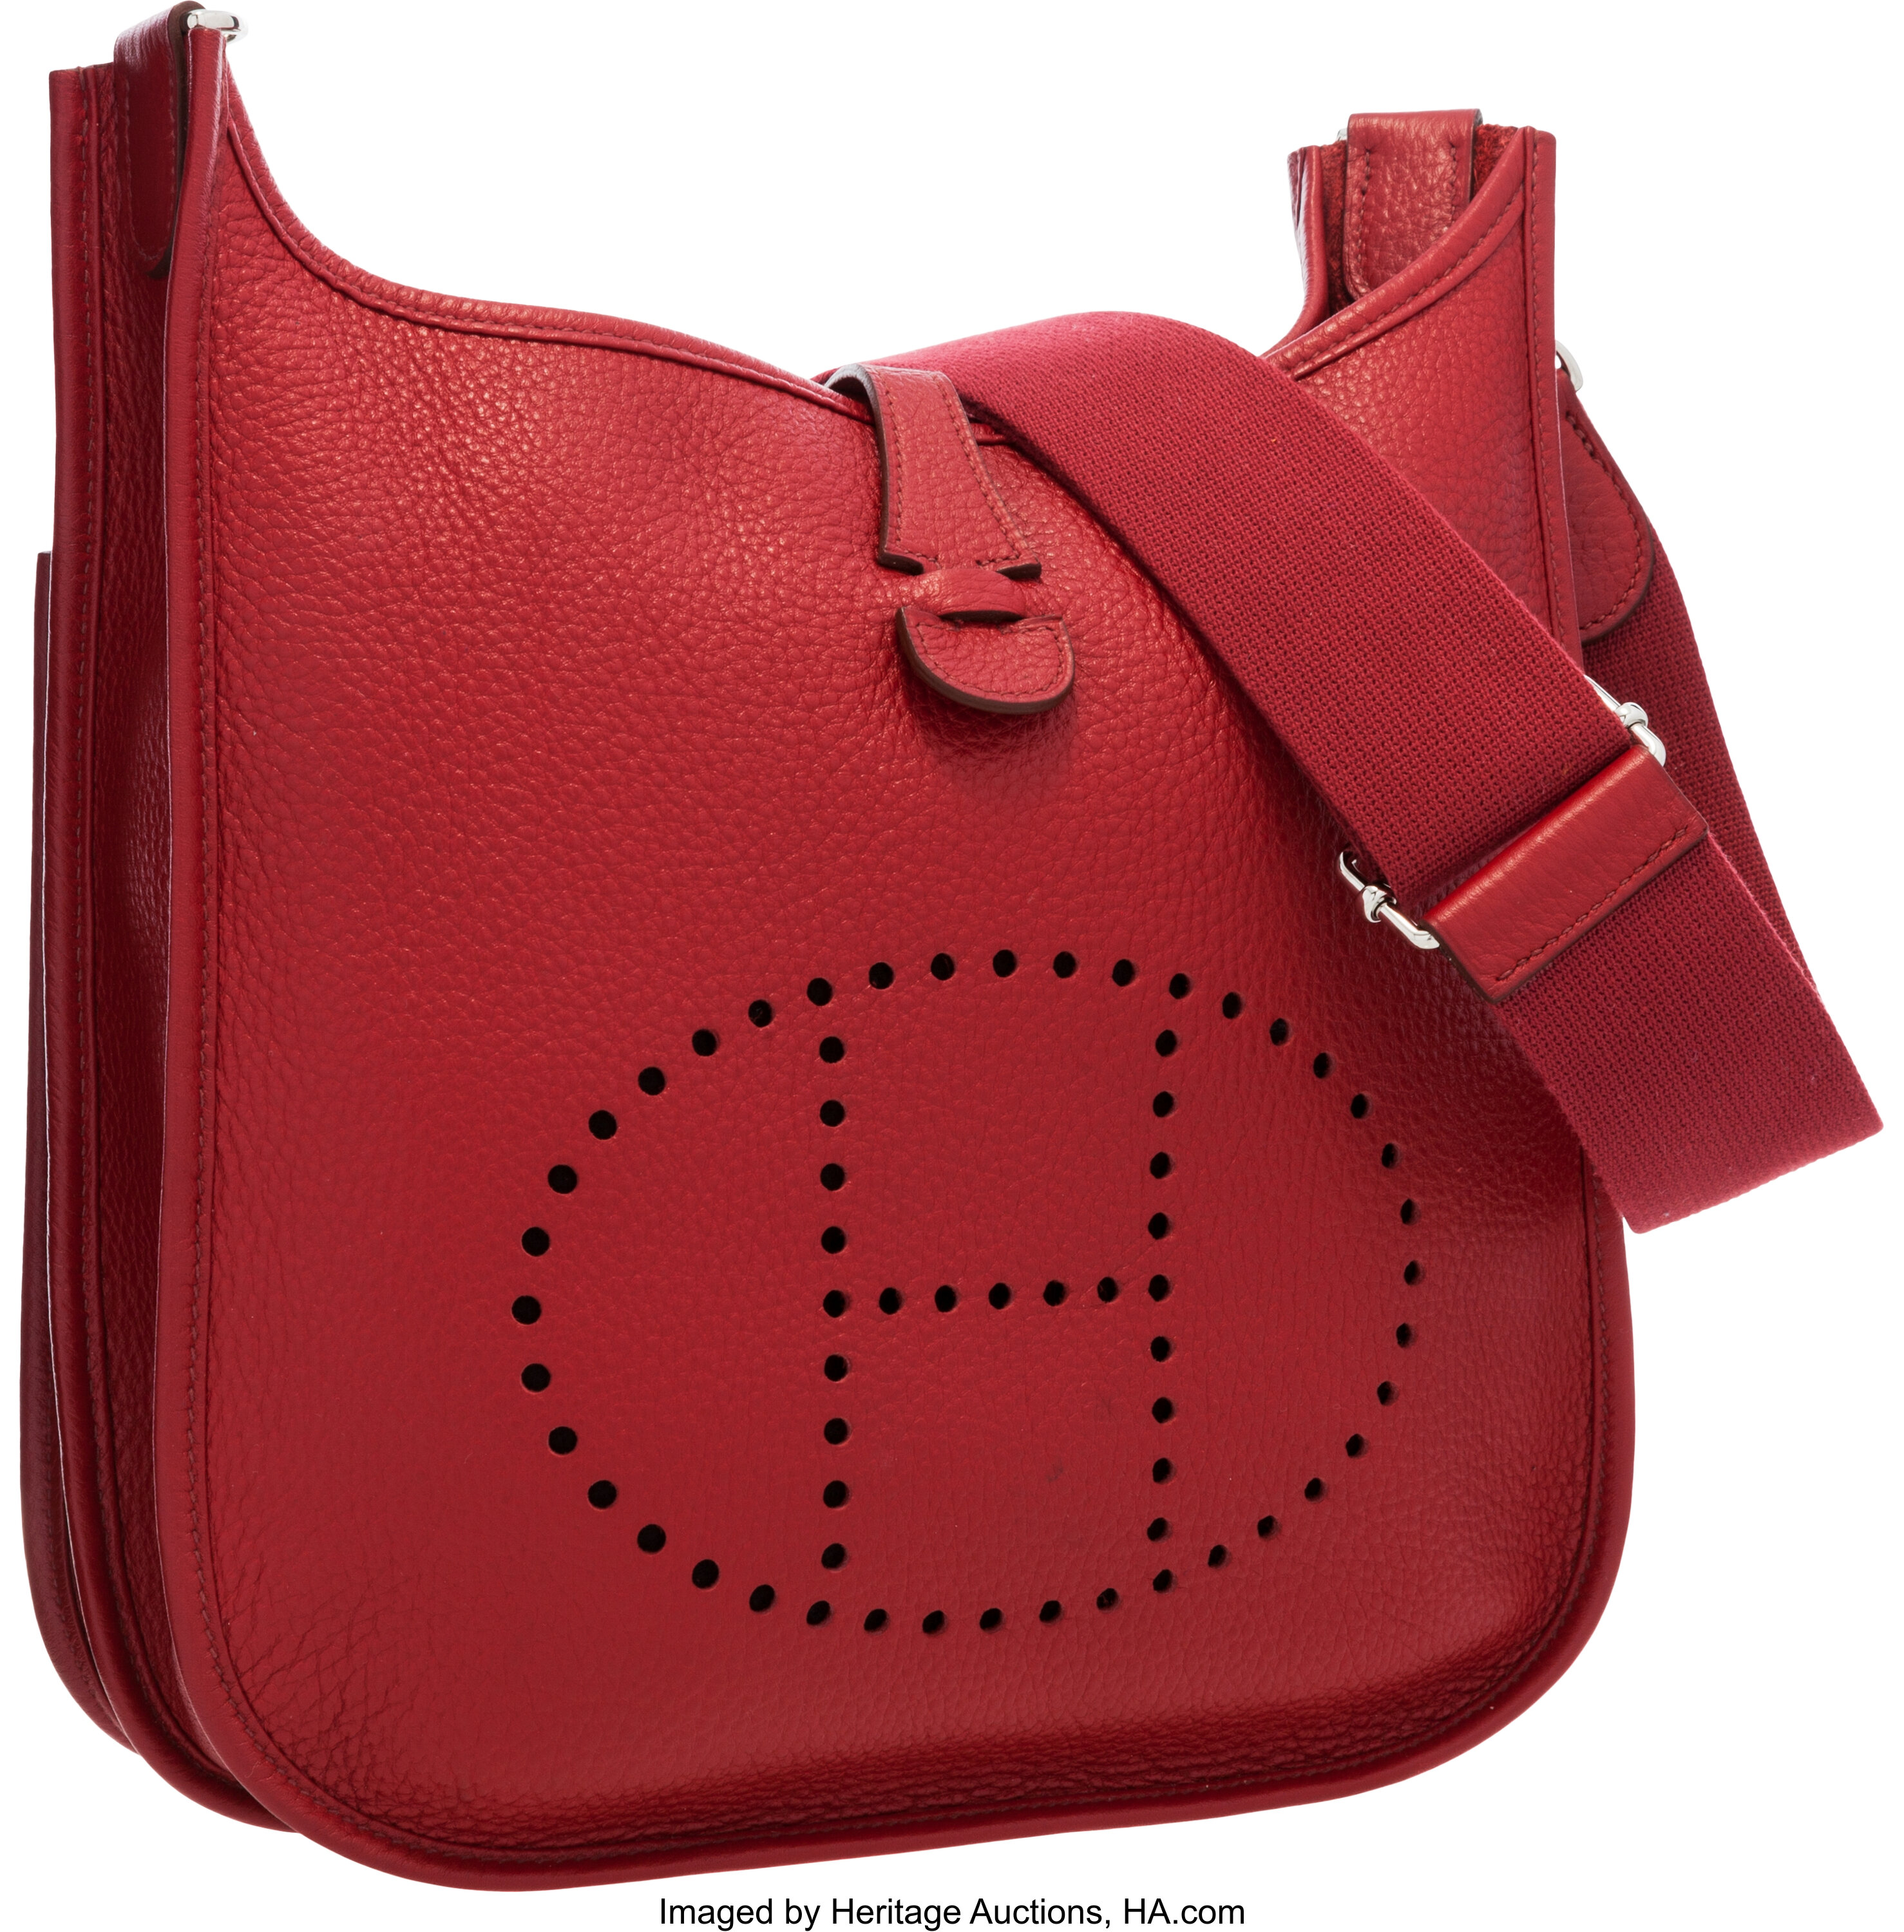 Sold at Auction: Hermes Clemence Leather Evelyne Bag